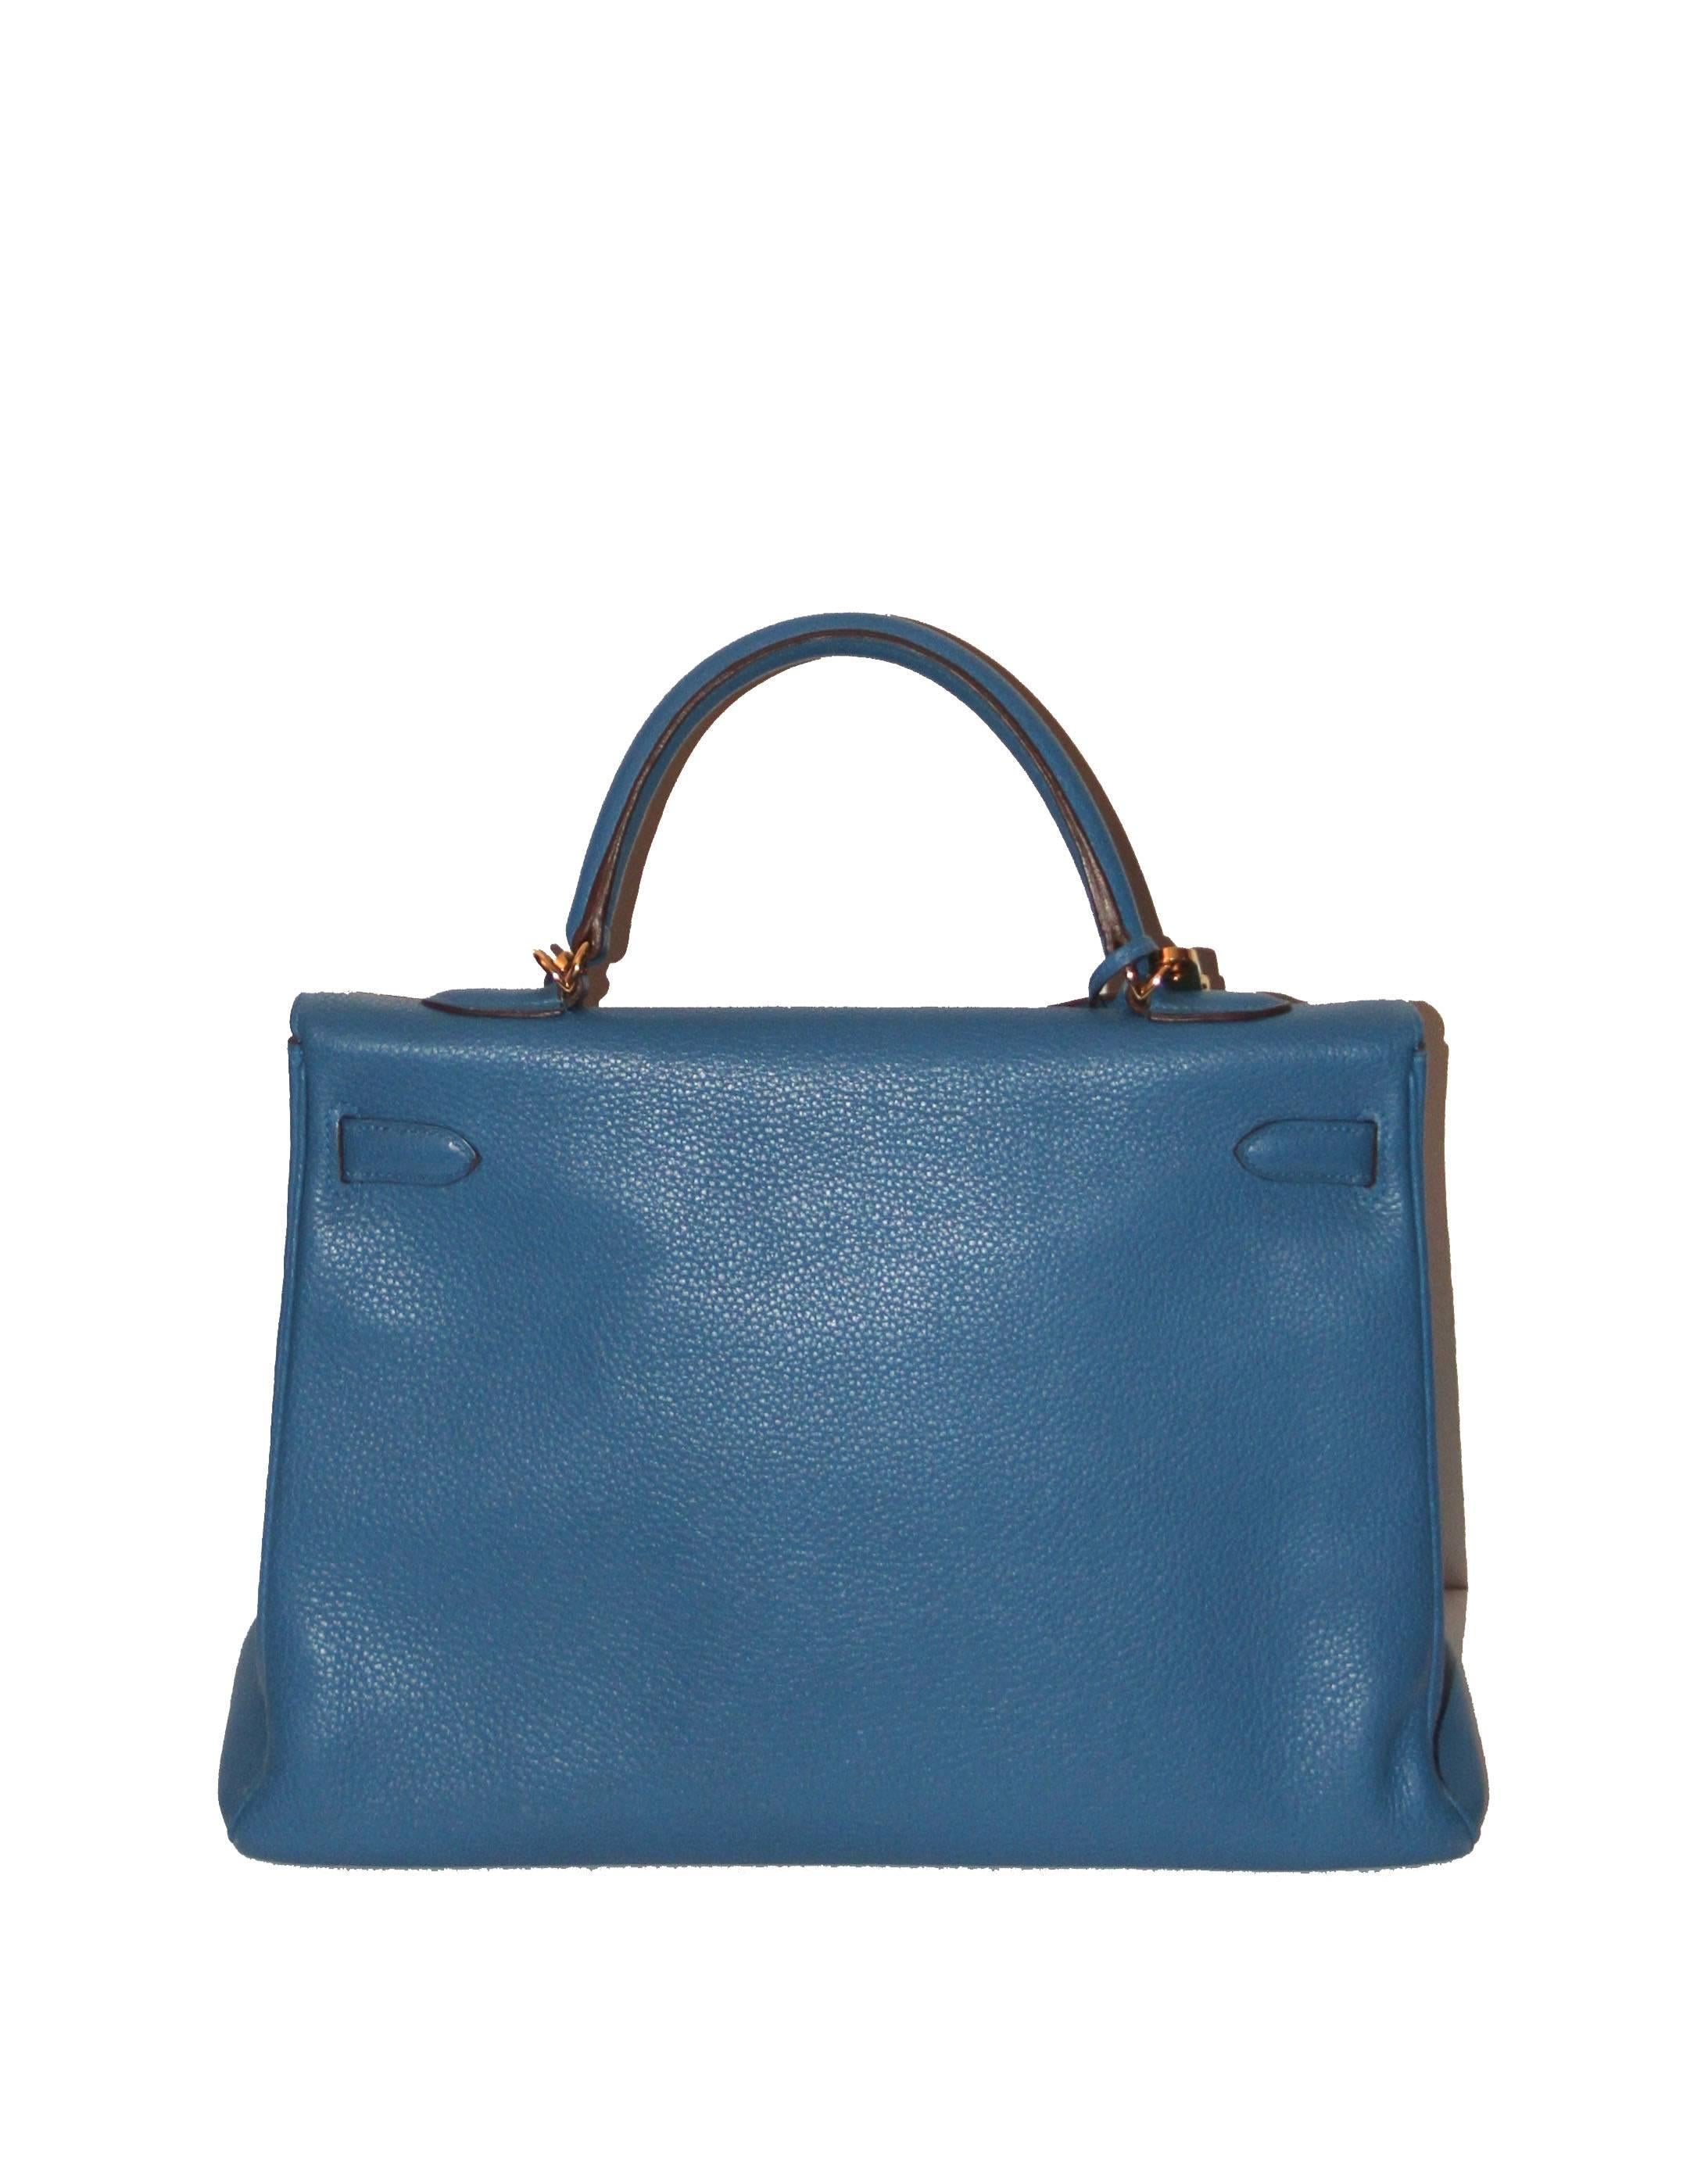 Wonderful Kelly retourné 35 cm bag from Hermès featuring an amazing blue color in Taurillon Clemence leather. Top handle in leather and extra shoulder strap allowing the bag to be worn either in the hand or at the shoulder.
Leather: Clemence